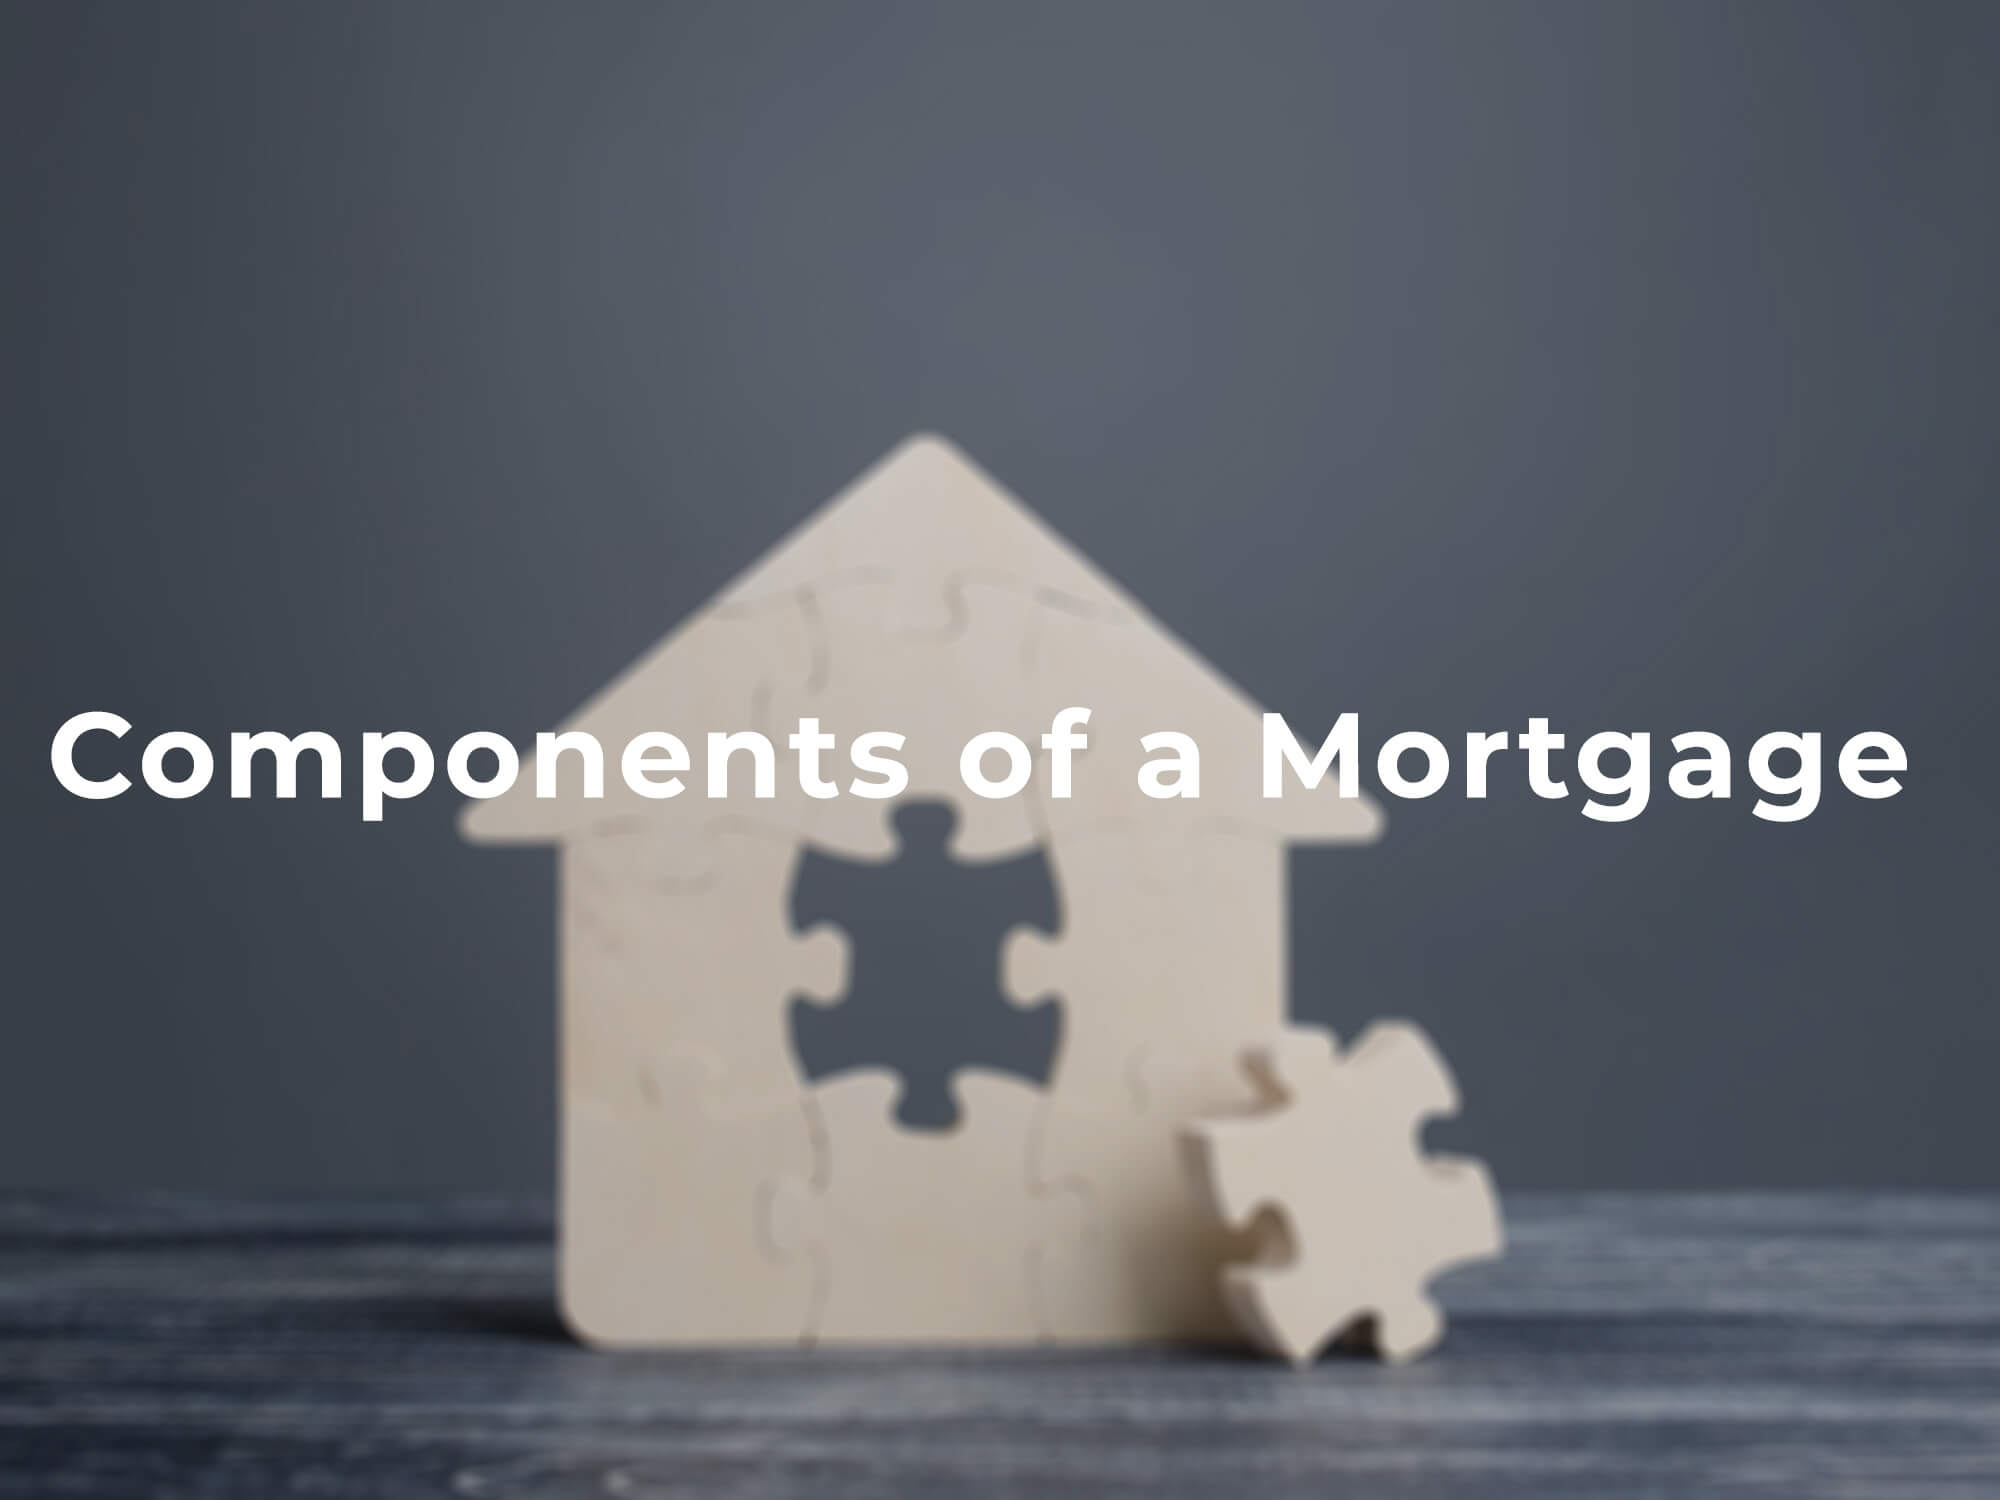 Components of a Mortgage